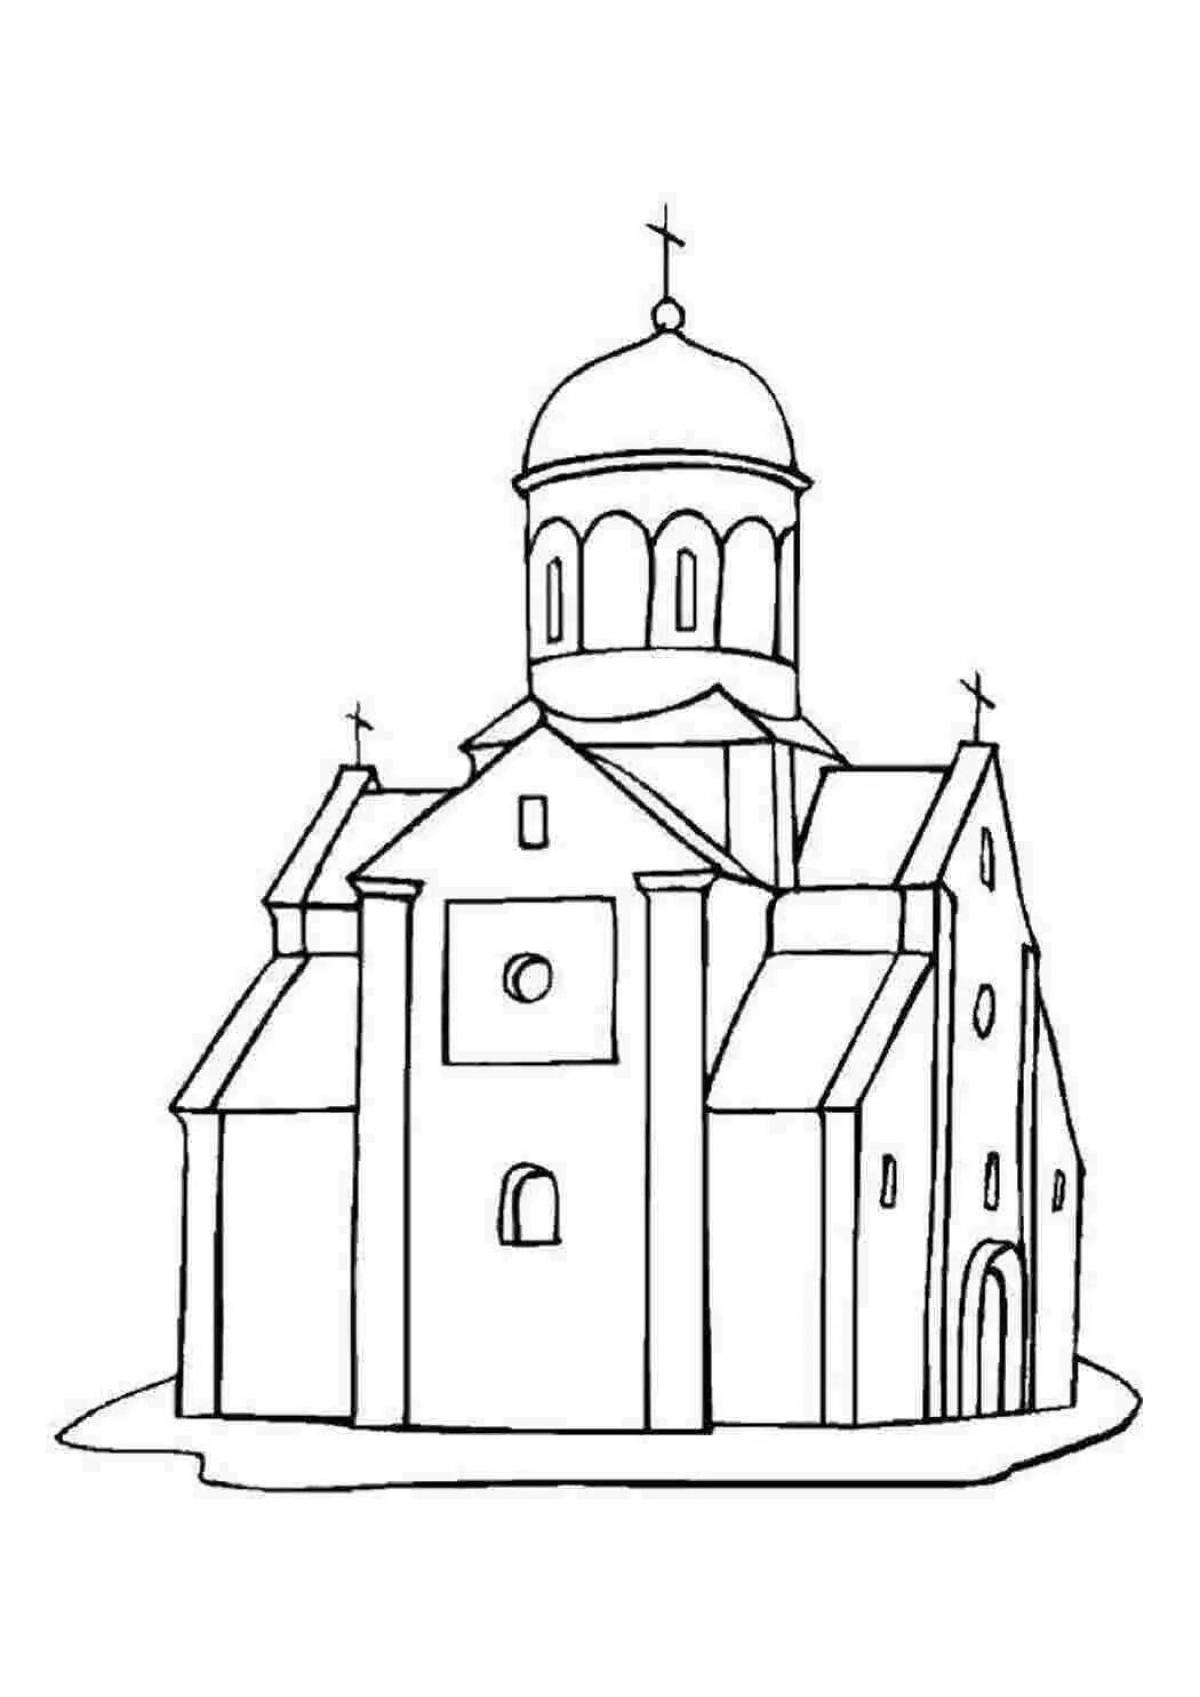 Exquisite monastery coloring page